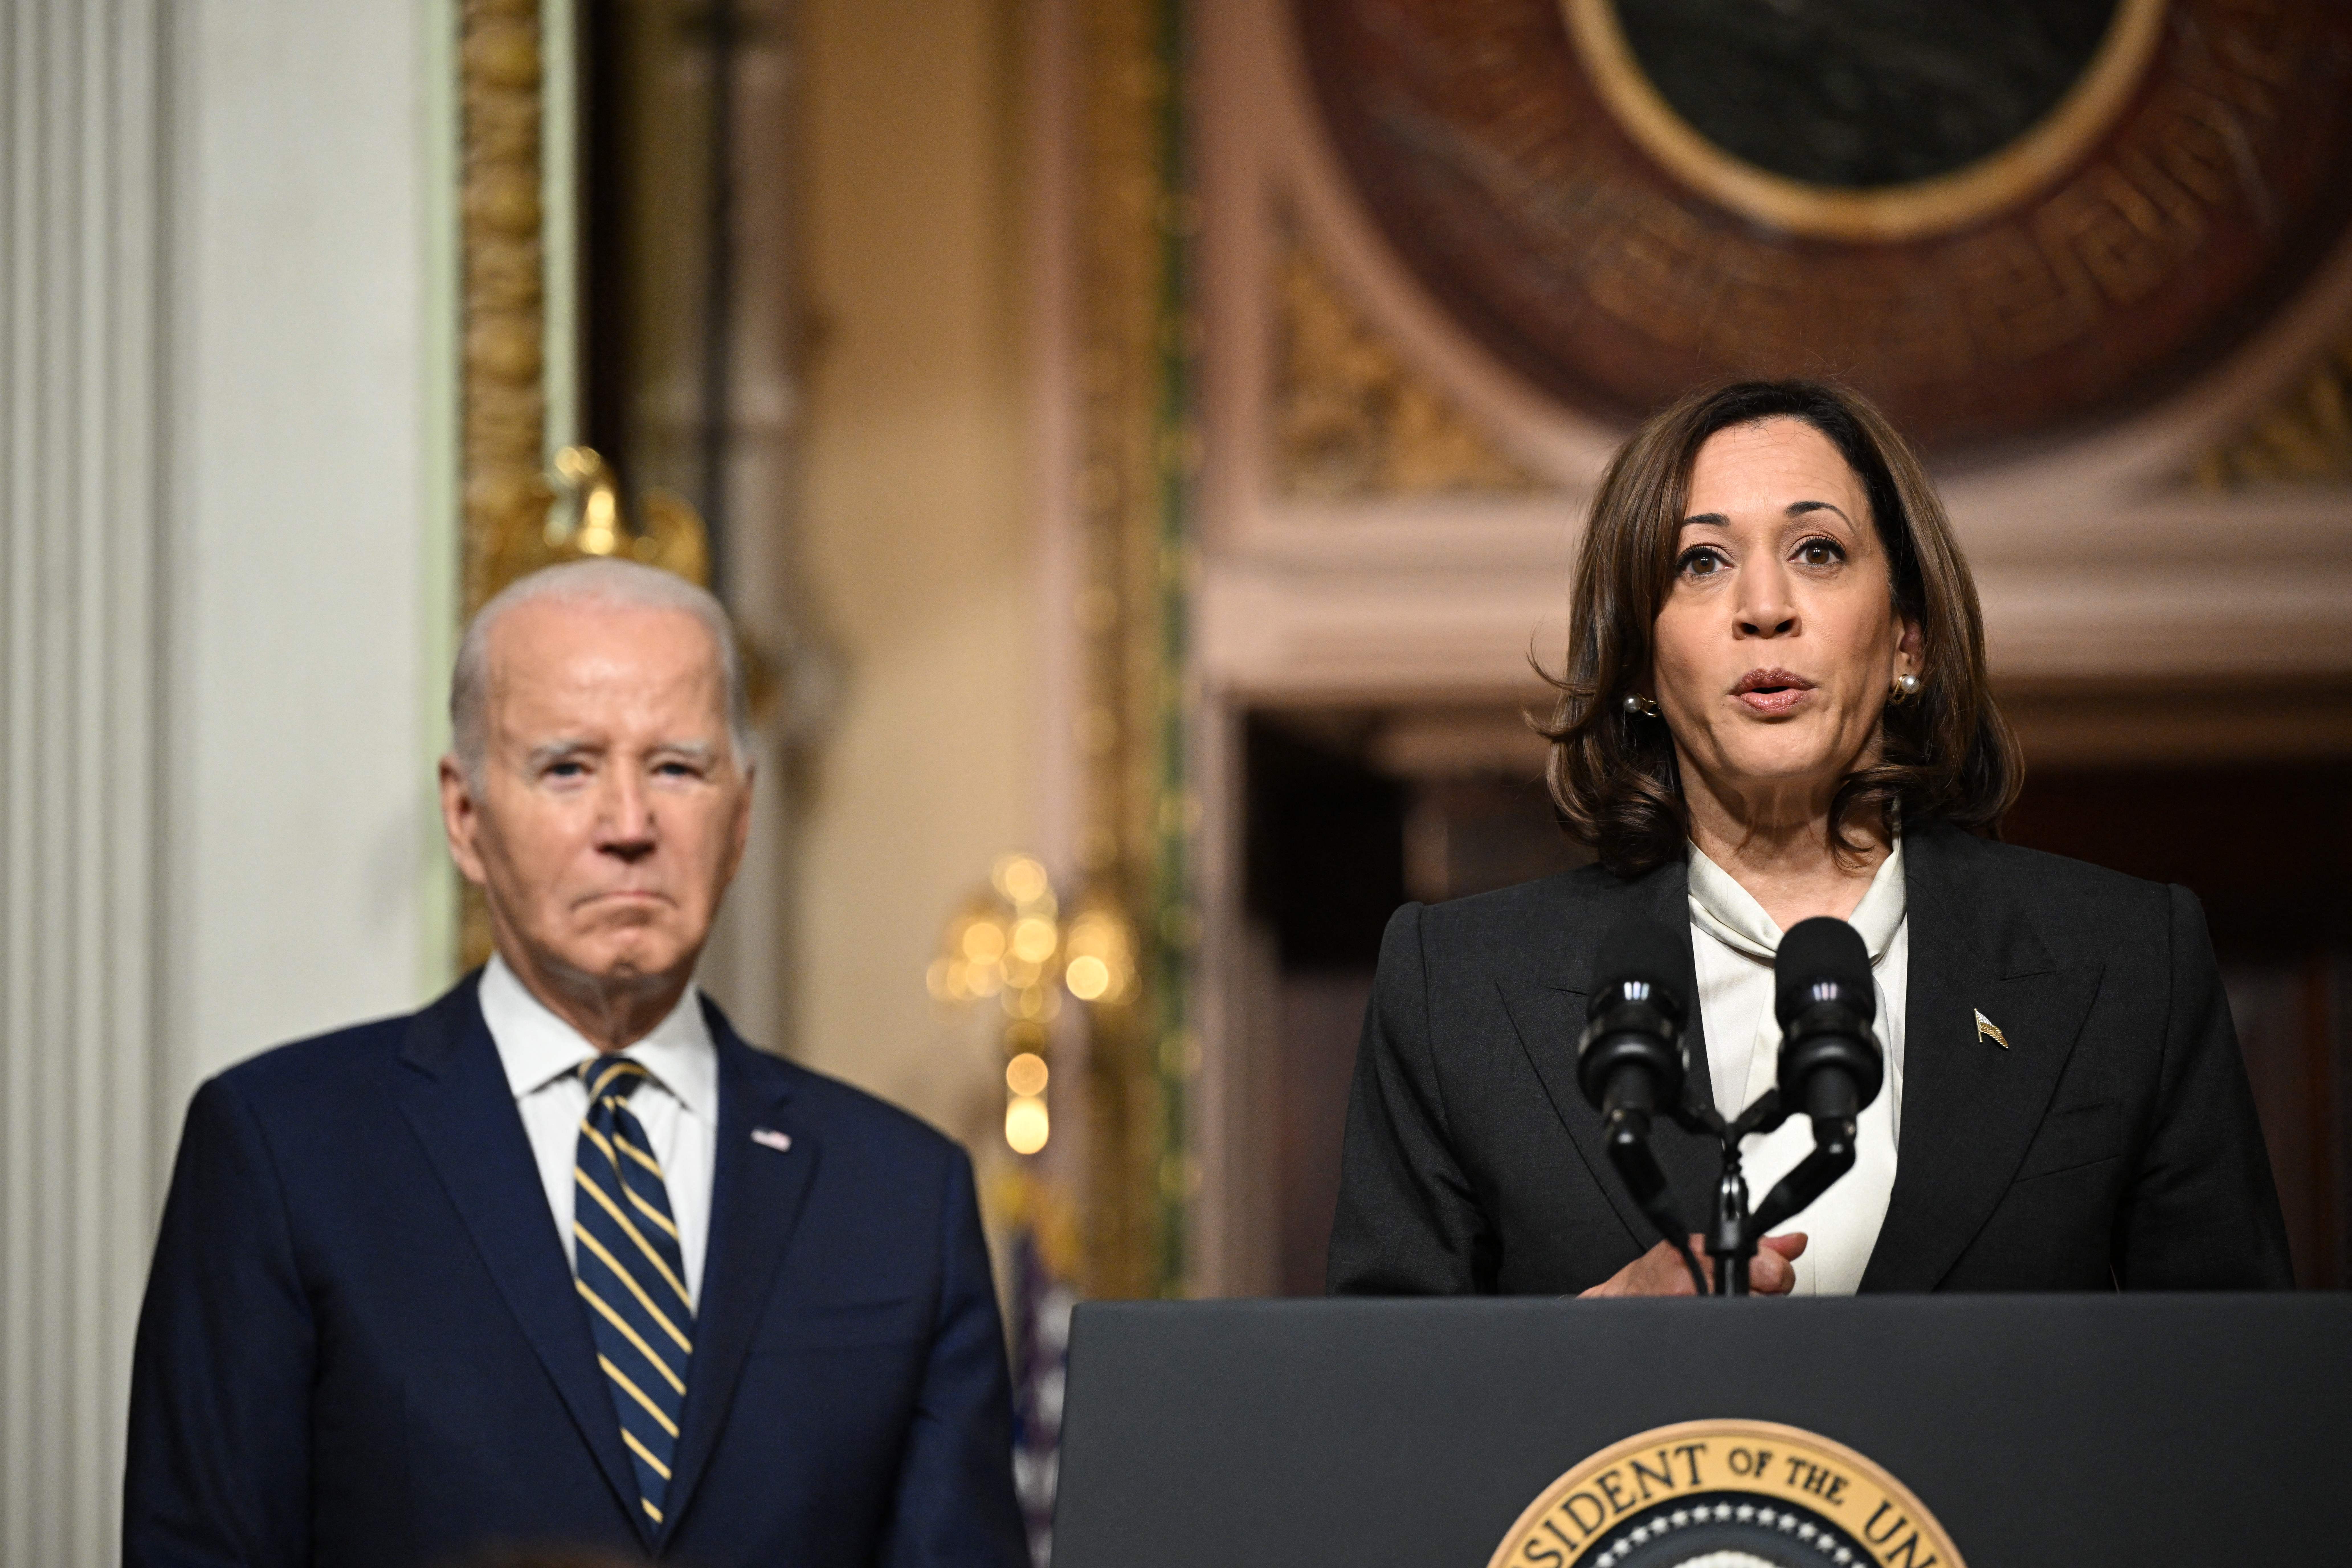 US Vice President Kamala Harris, with US President Joe Biden (L), speaks at a signing ceremony in the Indian Treaty Room of the Eisenhower Executive Office Building, next to the White House in Washington, DC on July 25, 2023. President Biden is signing a proclamation establishing the Emmett Till and Mamie Till-Mobley National Monument in Illinois and Mississippi. (Photo by Mandel NGAN / AFP) (Photo by MANDEL NGAN/AFP via Getty Images)